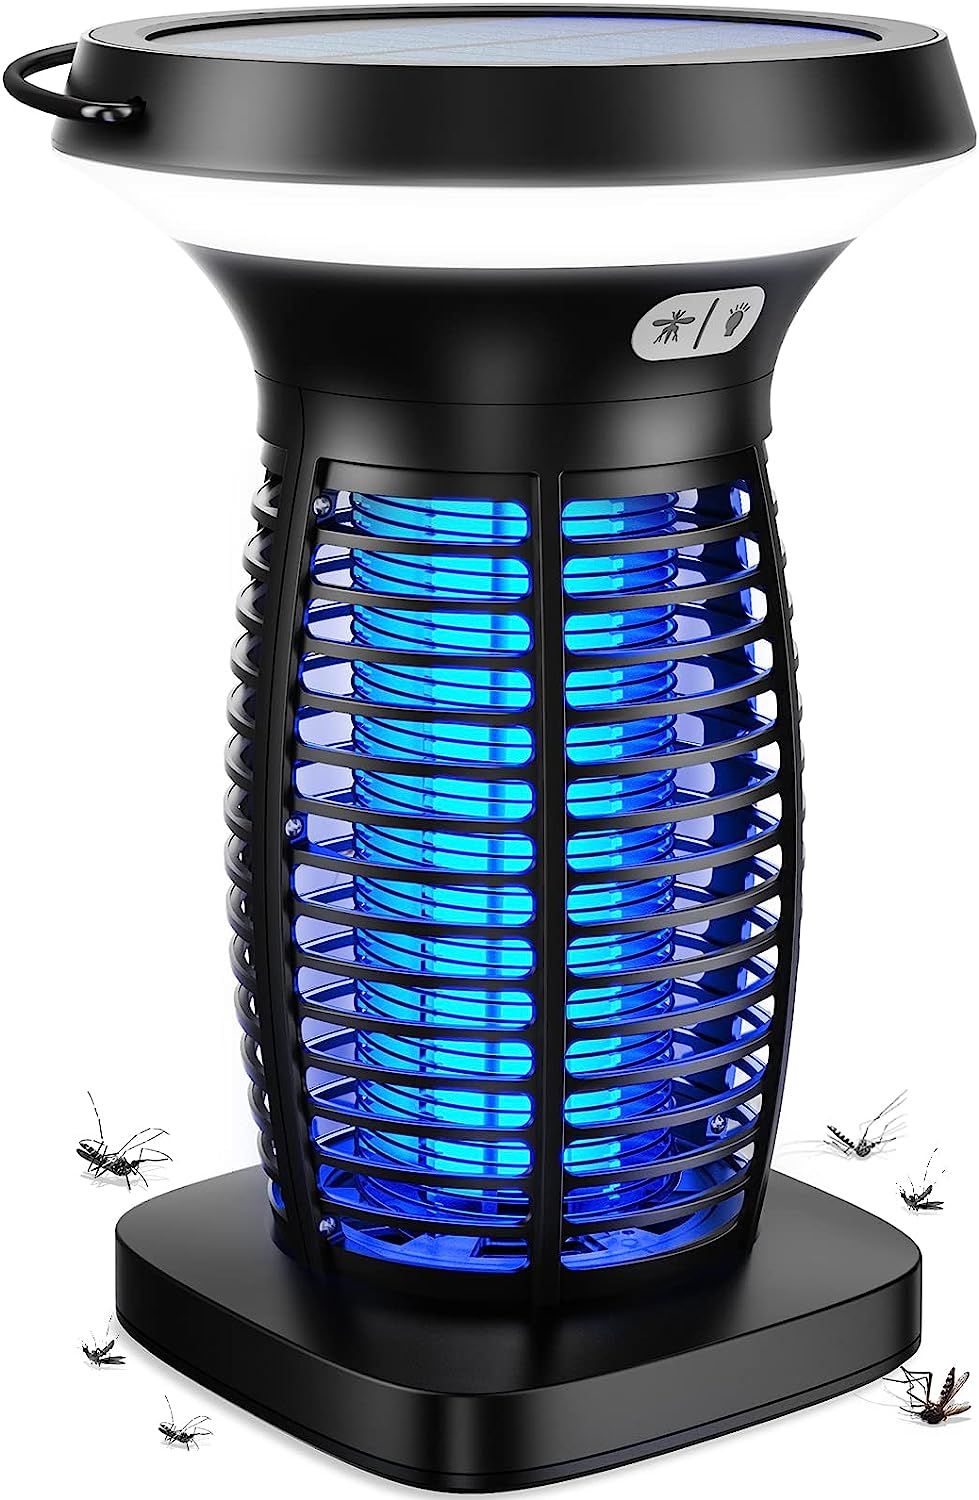 https://bigbigmart.com/wp-content/uploads/2023/06/Zechuan-Solar-Bug-Zapper-Outdoor-Waterproof-High-Powered-Pest-Control-Electric-Mosquito-Zapper-Killer-Indoor-Rechargeable-Insect-Trap-Fly-Zapper-for-Home-Patio-Backyard-Camping.jpg